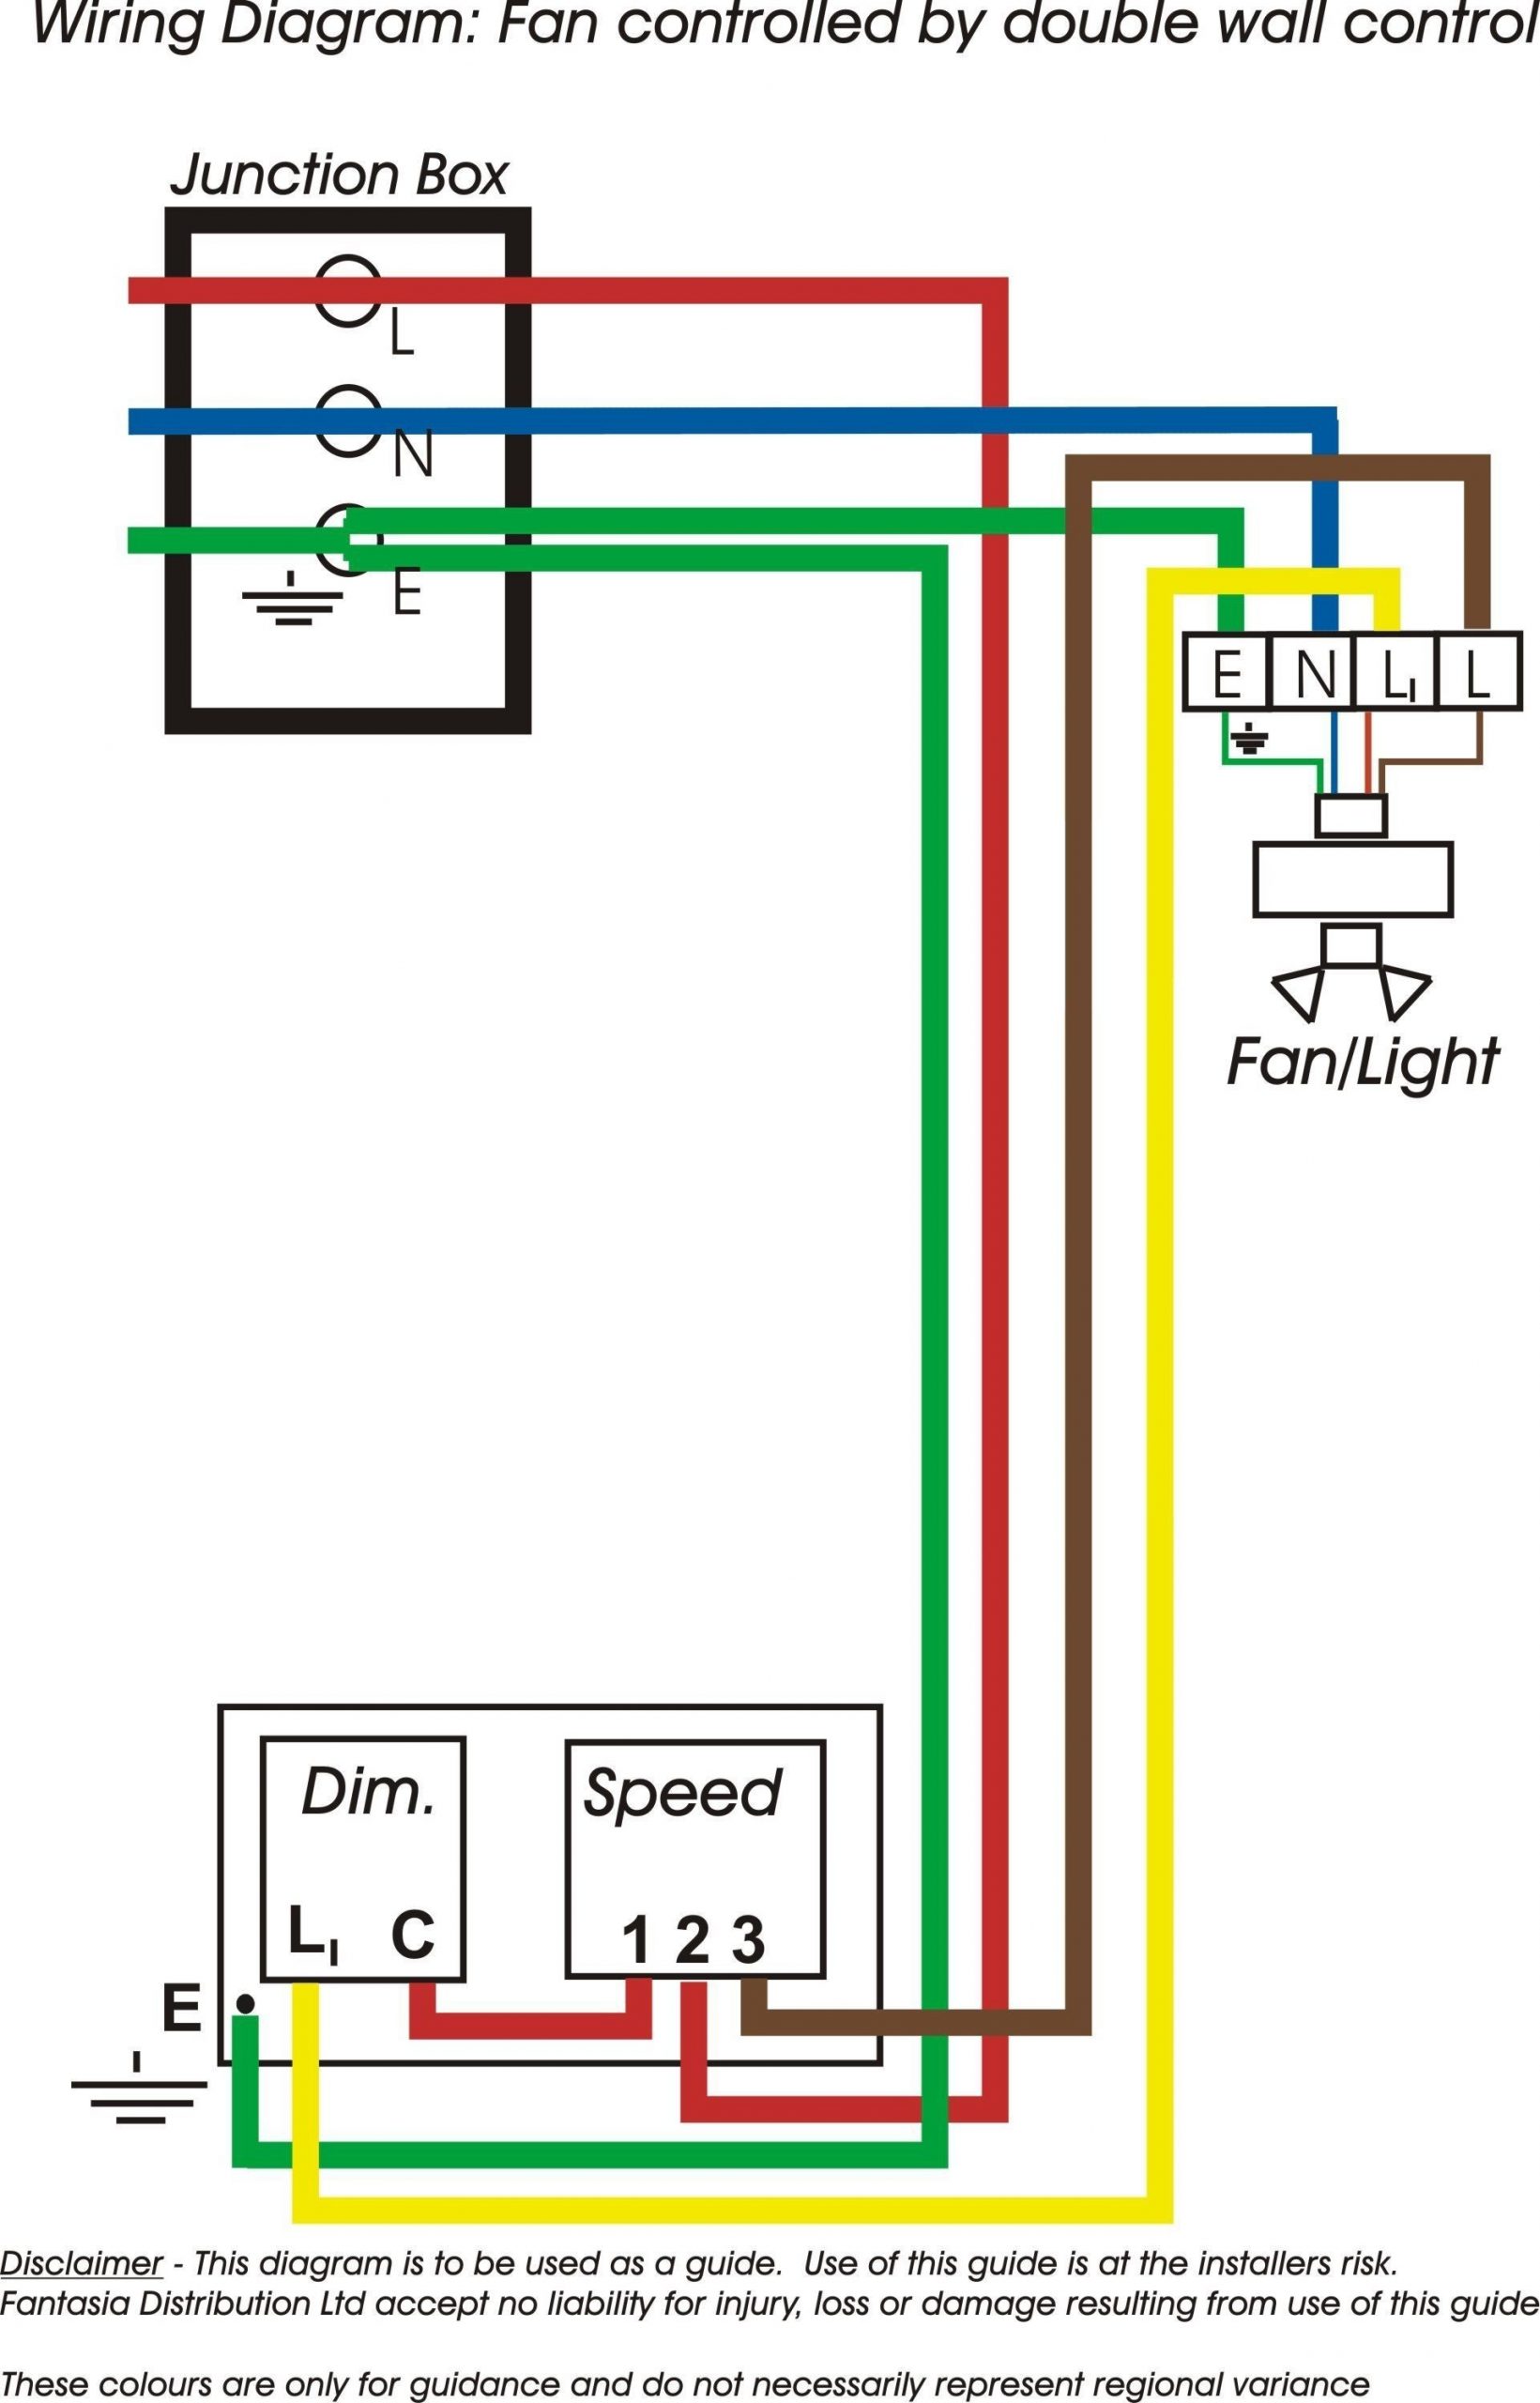 New Industrial Exhaust Fan Wiring Diagram Diagram with size 1921 X 2997